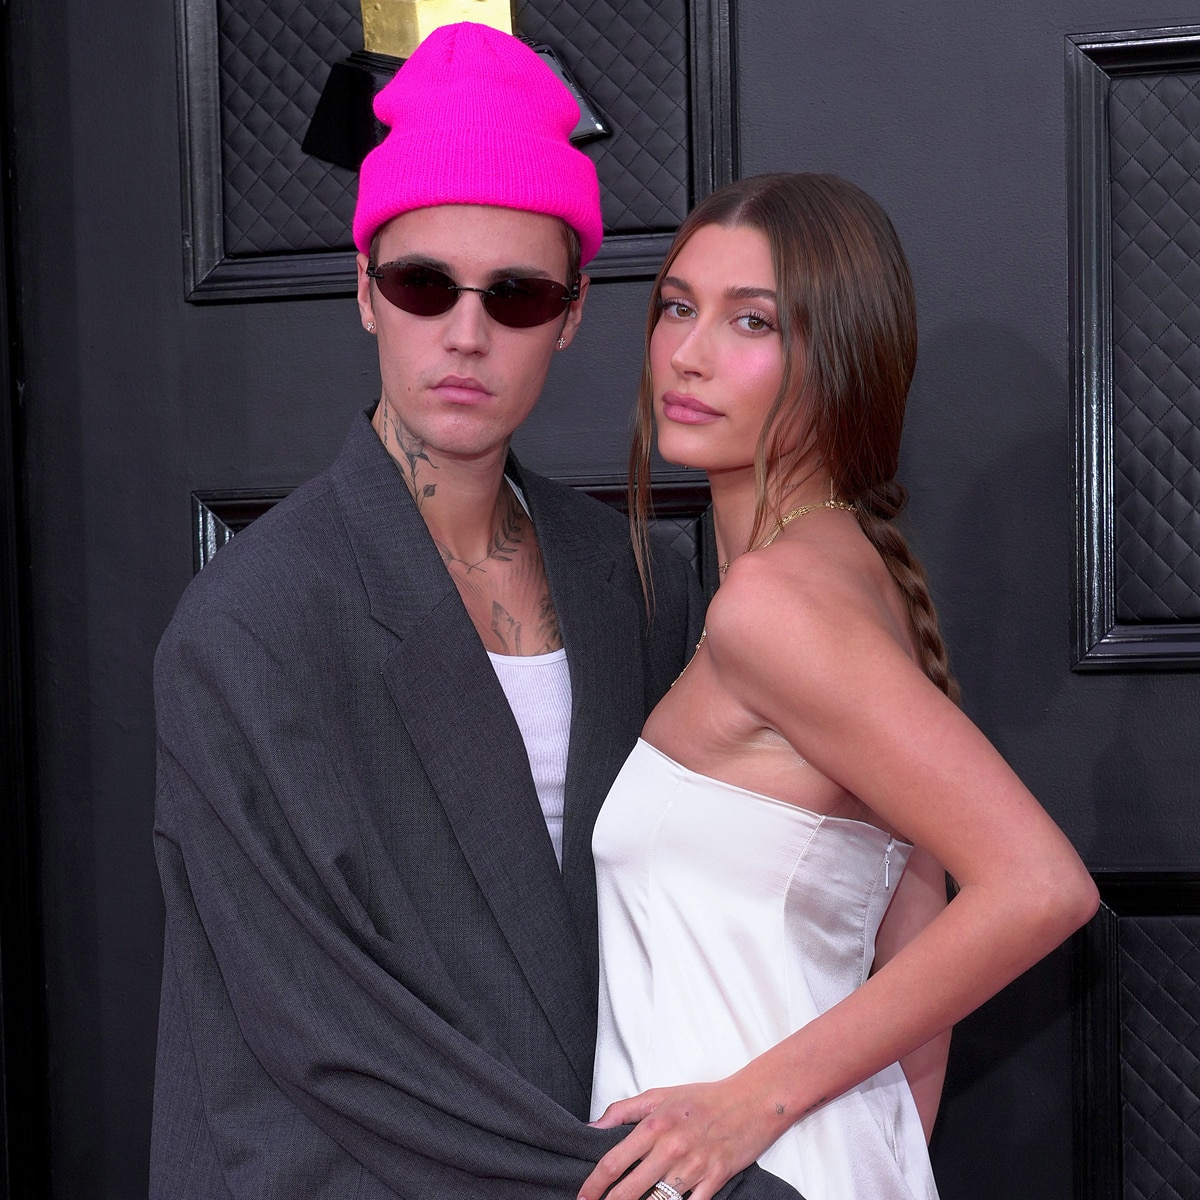 Pregnant Hailey Bieber Gives Shoutout to “Baby Daddy” Justin Bieber